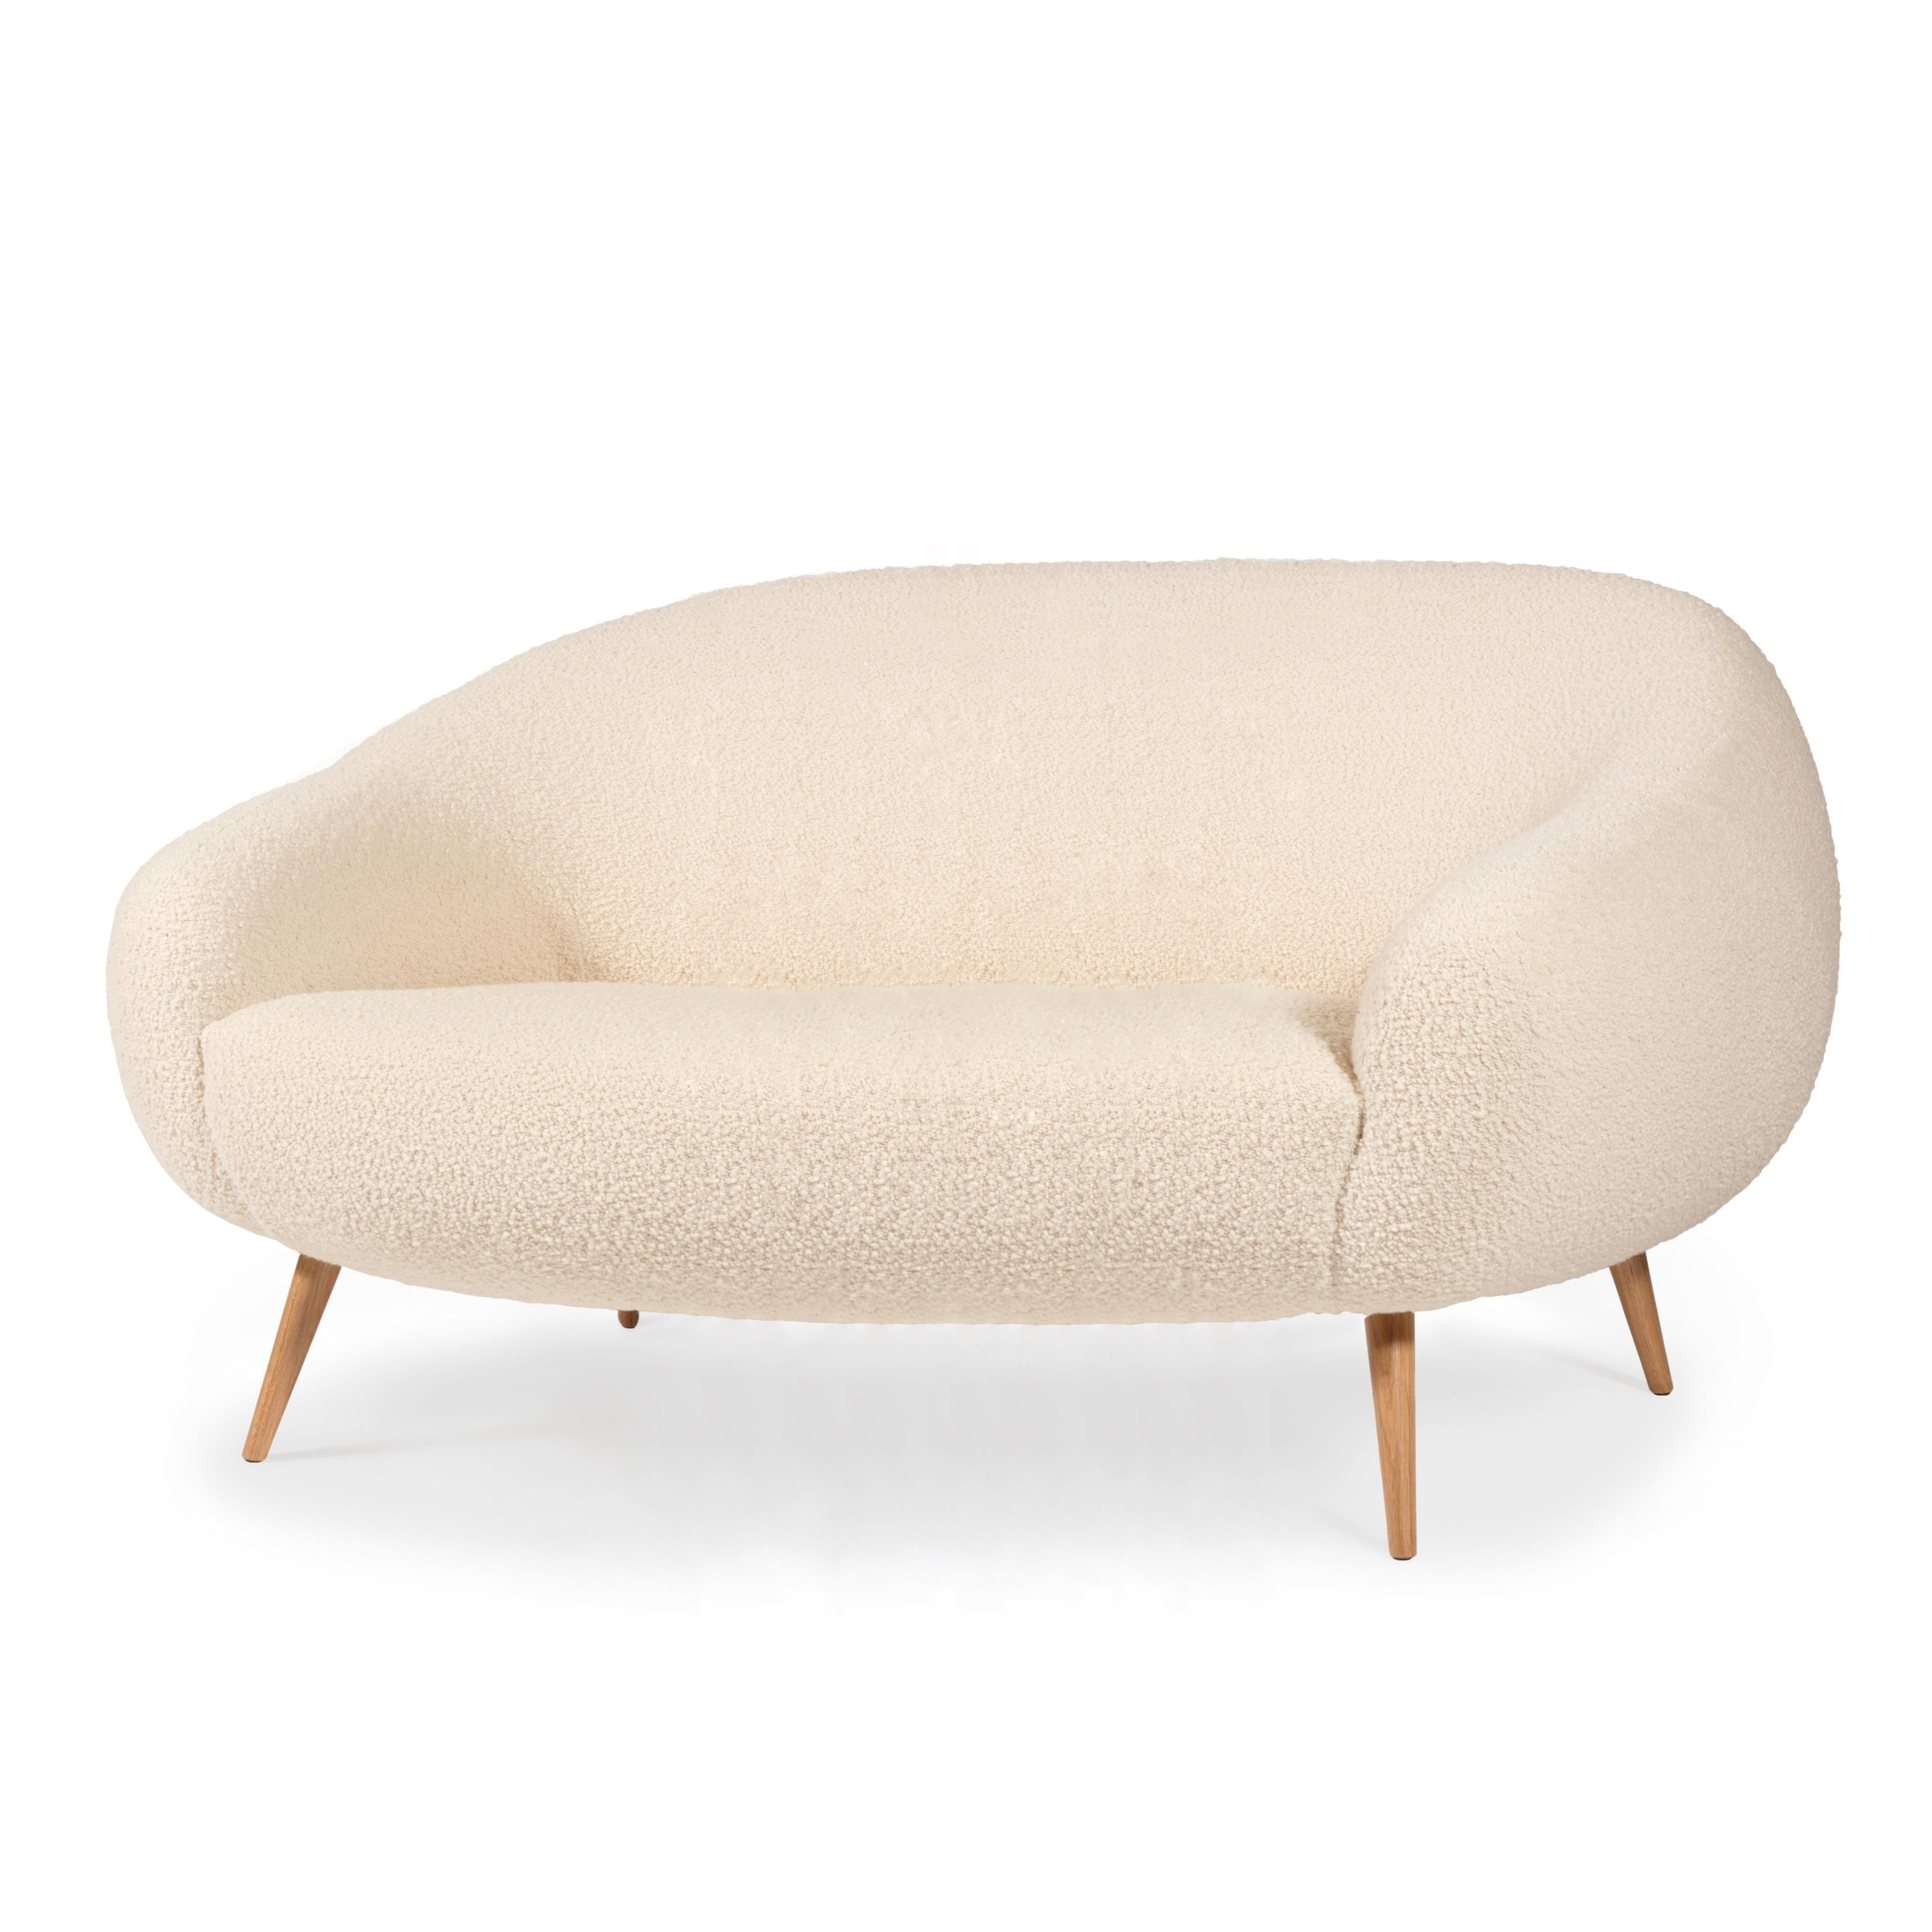 The Niemeyer sofa is named after the Brazilian Architect Oscar Niemeyer whose Architecture was spread like sculptural poetry in the History of humankind.
The rounded lines of the sofa are influenced by the remarkable ‘Casa das Canoas’ designed by